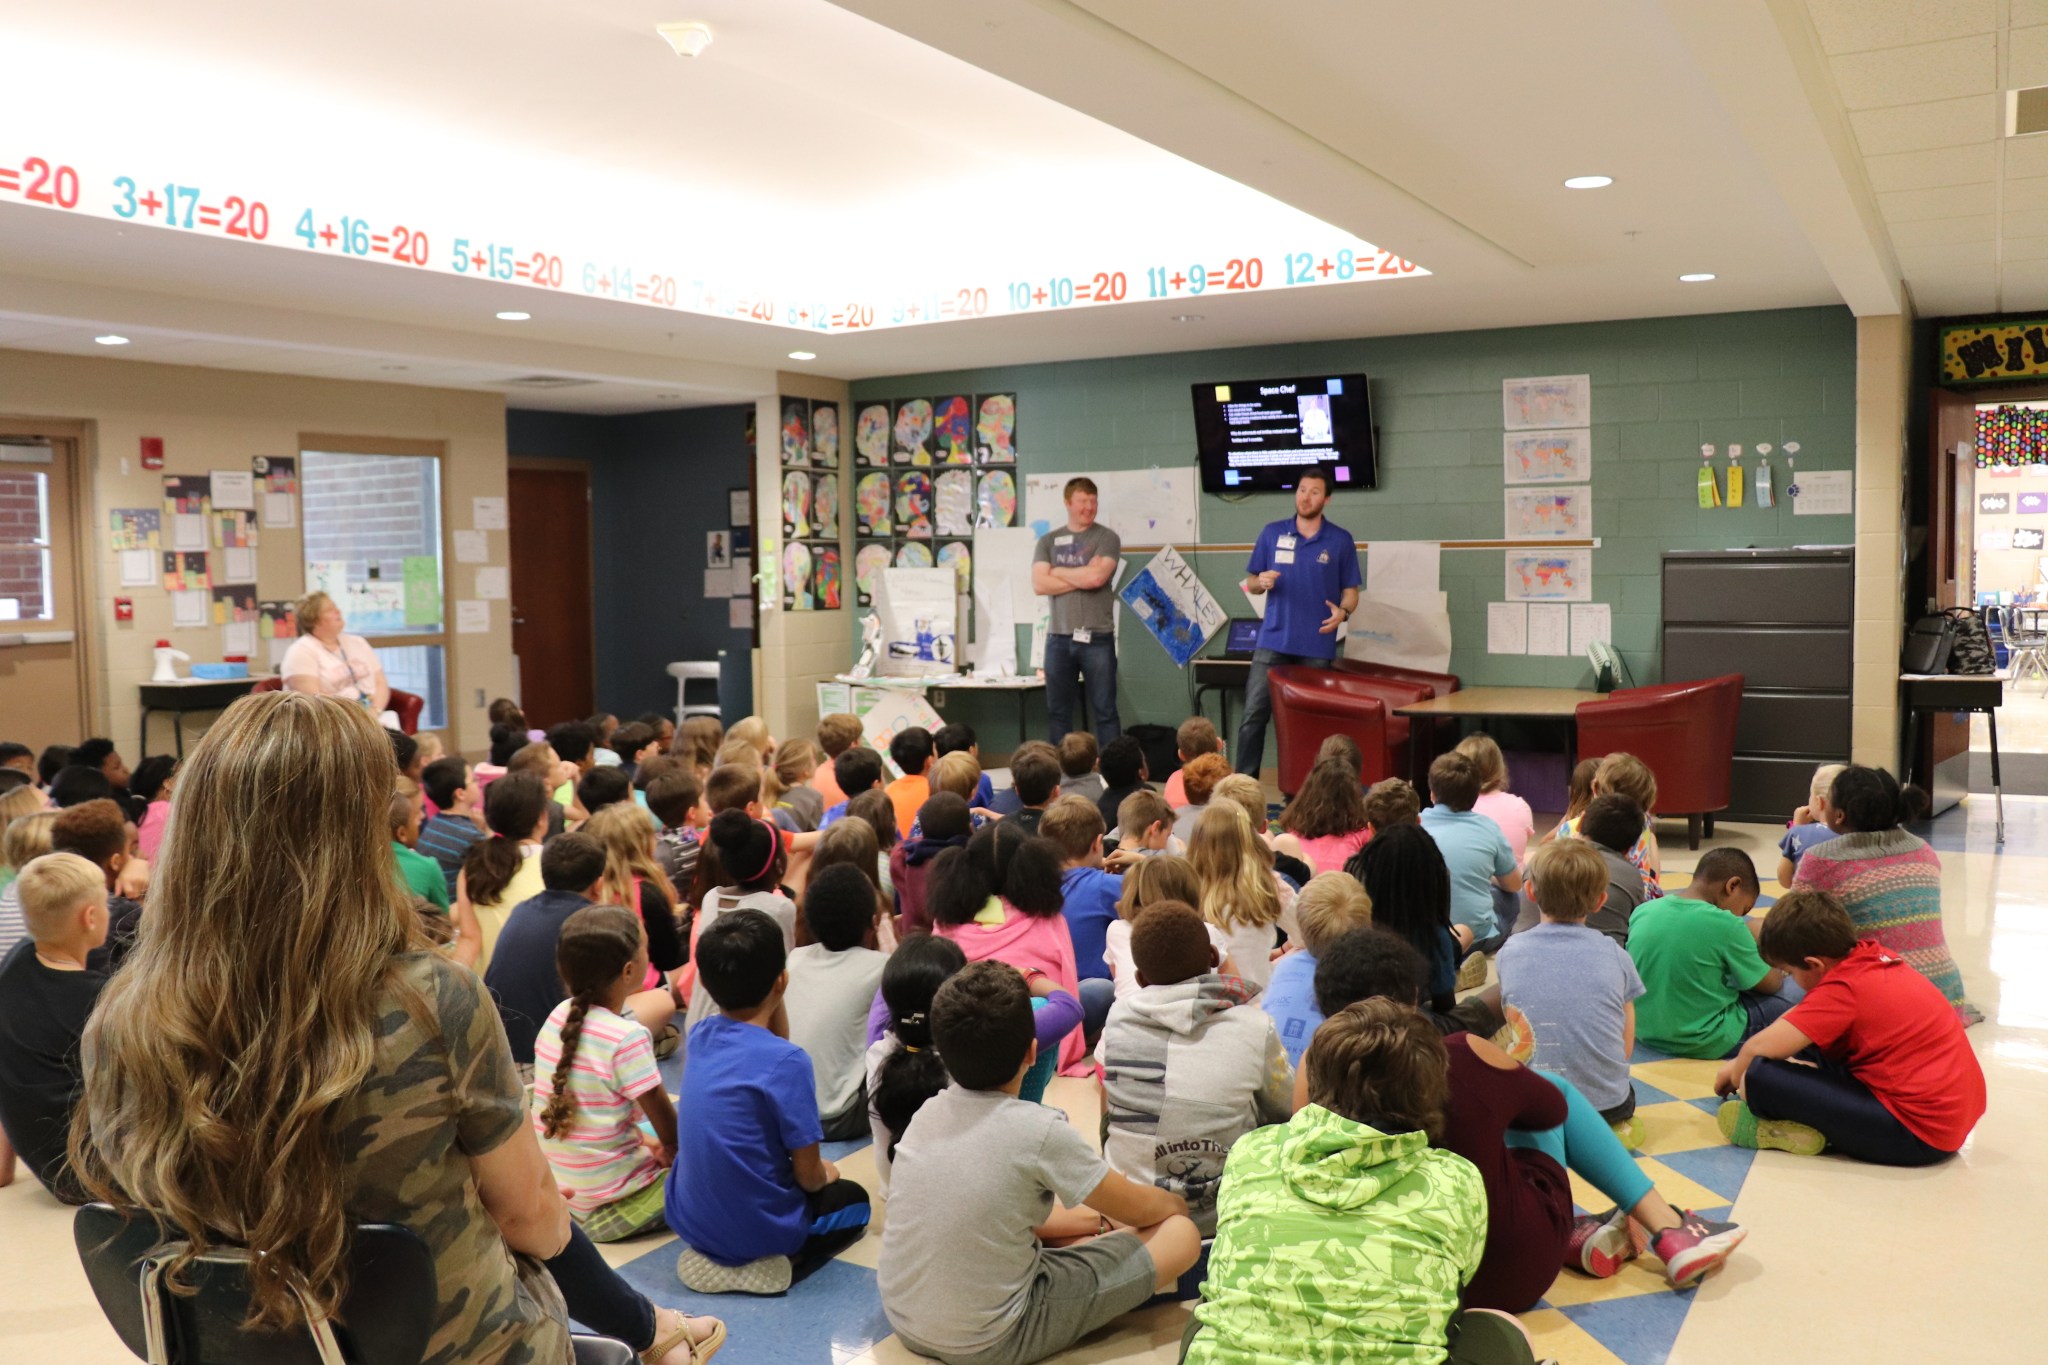 Marshall SMA team members engage a group of students at Deer Valley Elementary School in Hoover on May 4.